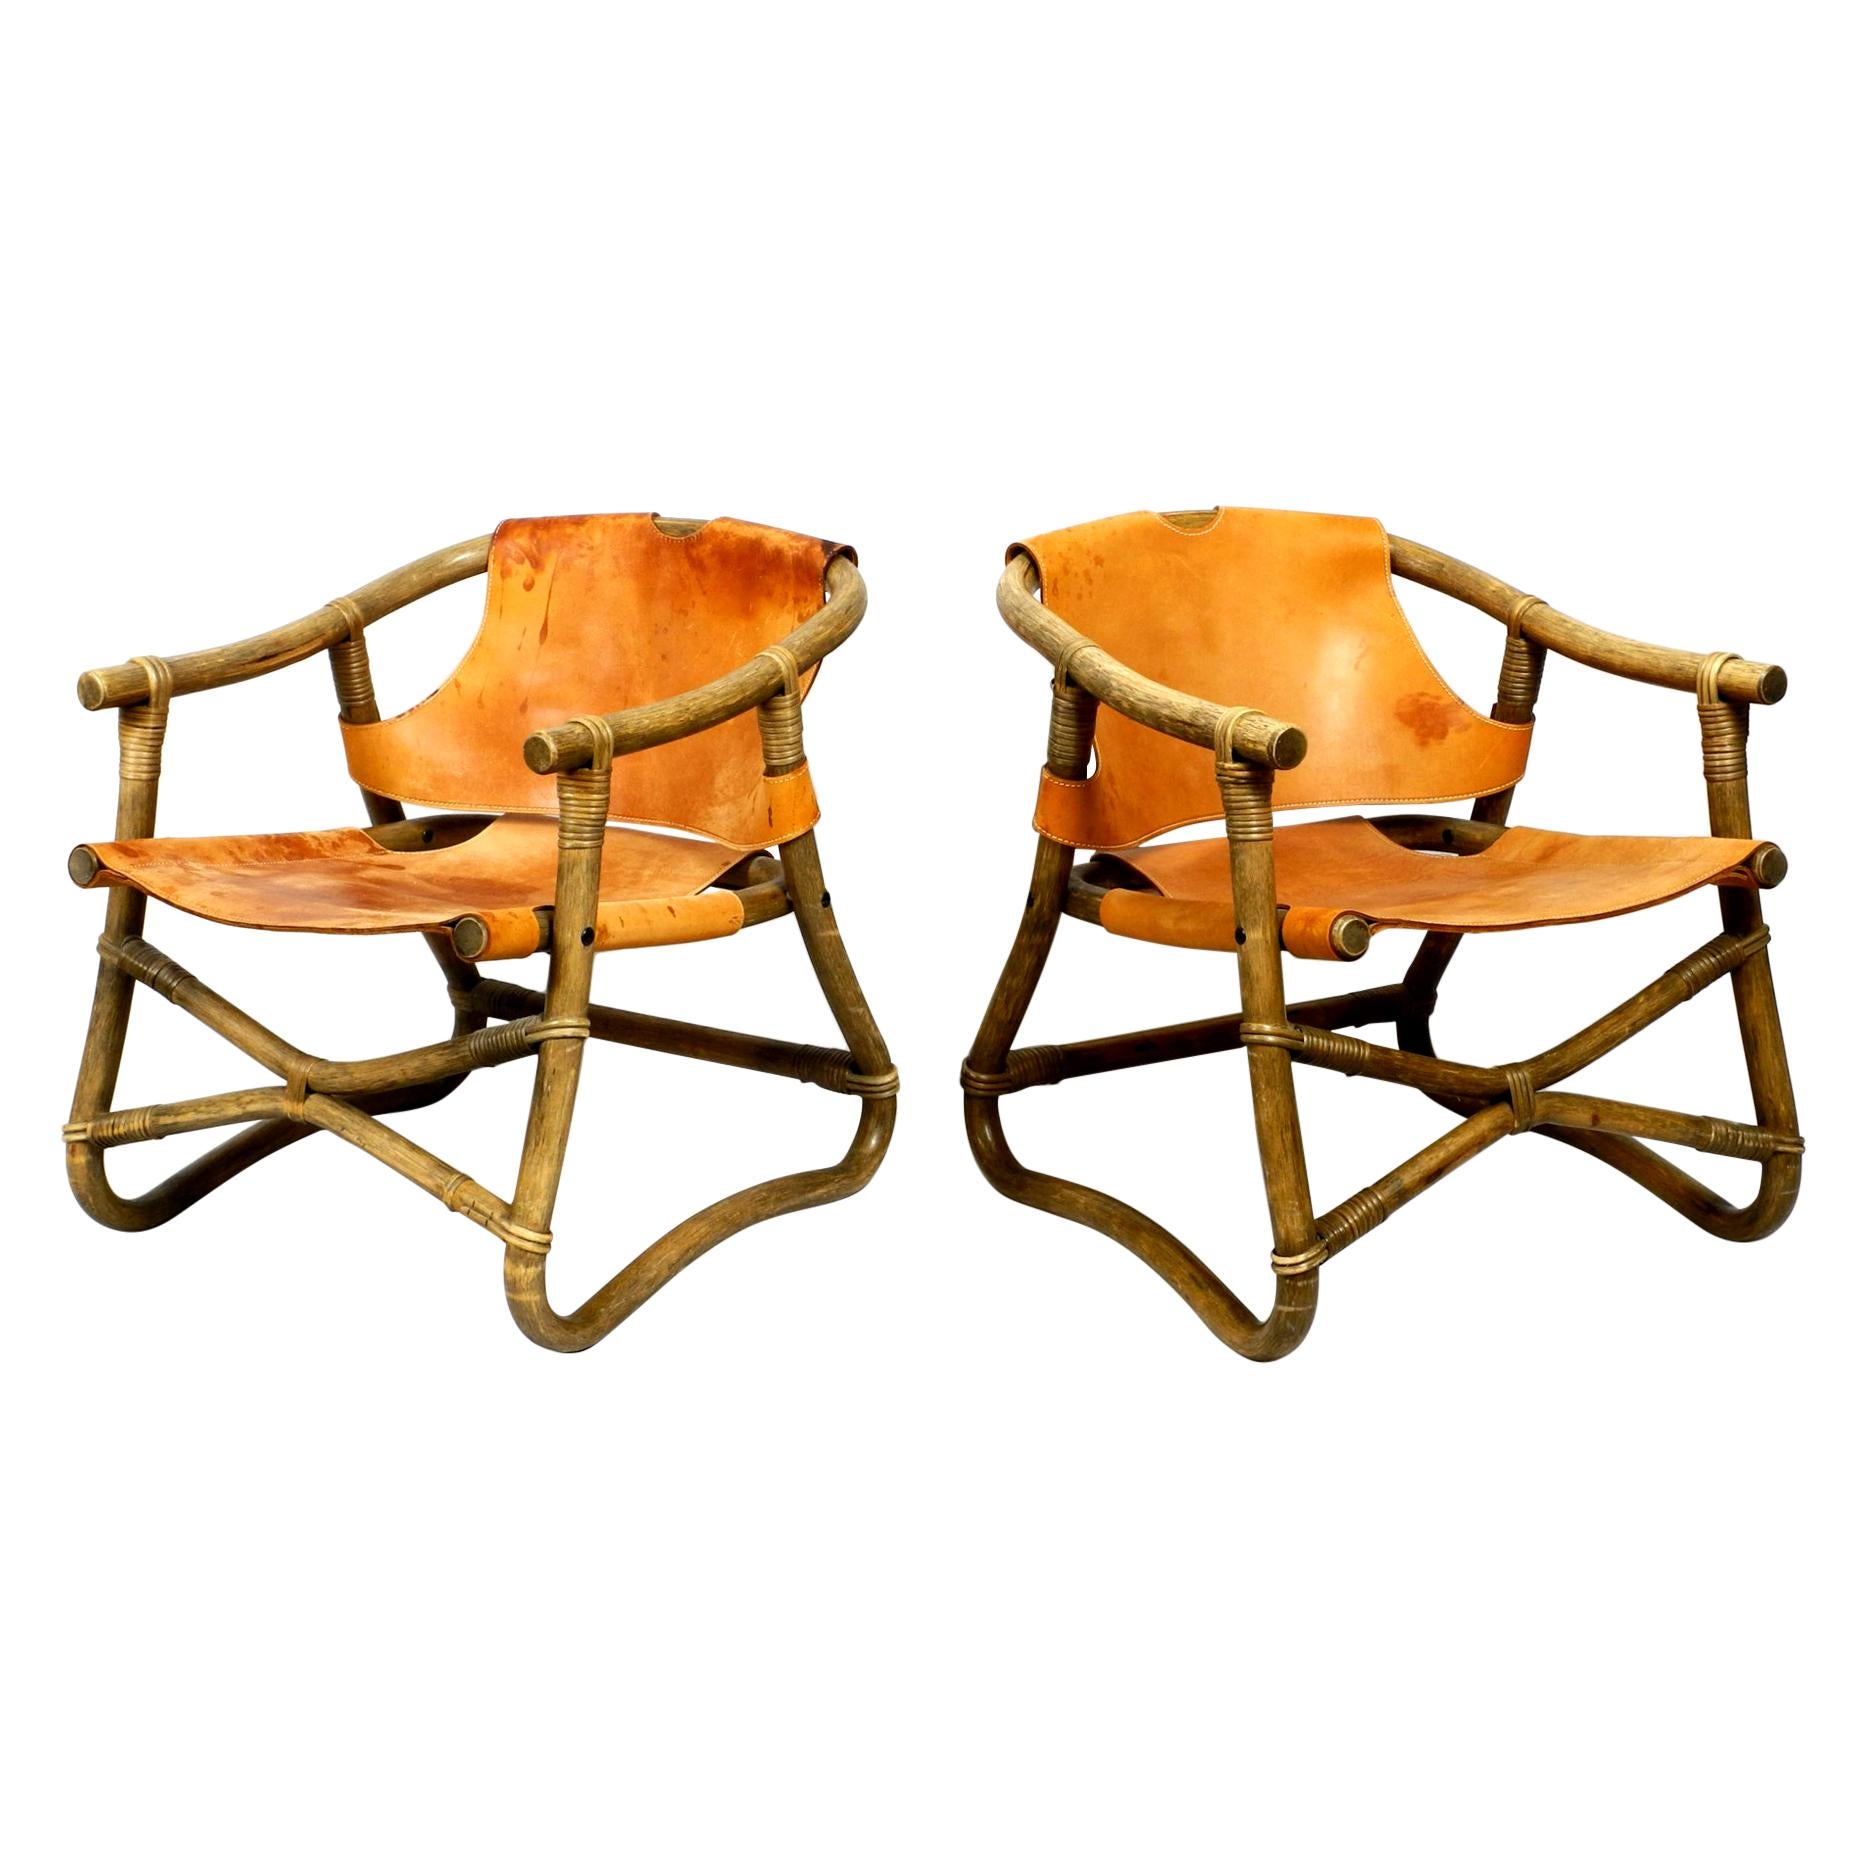 Pair of Original 1960s Safari Lounge Chairs Made of Bamboo and Brown Leather